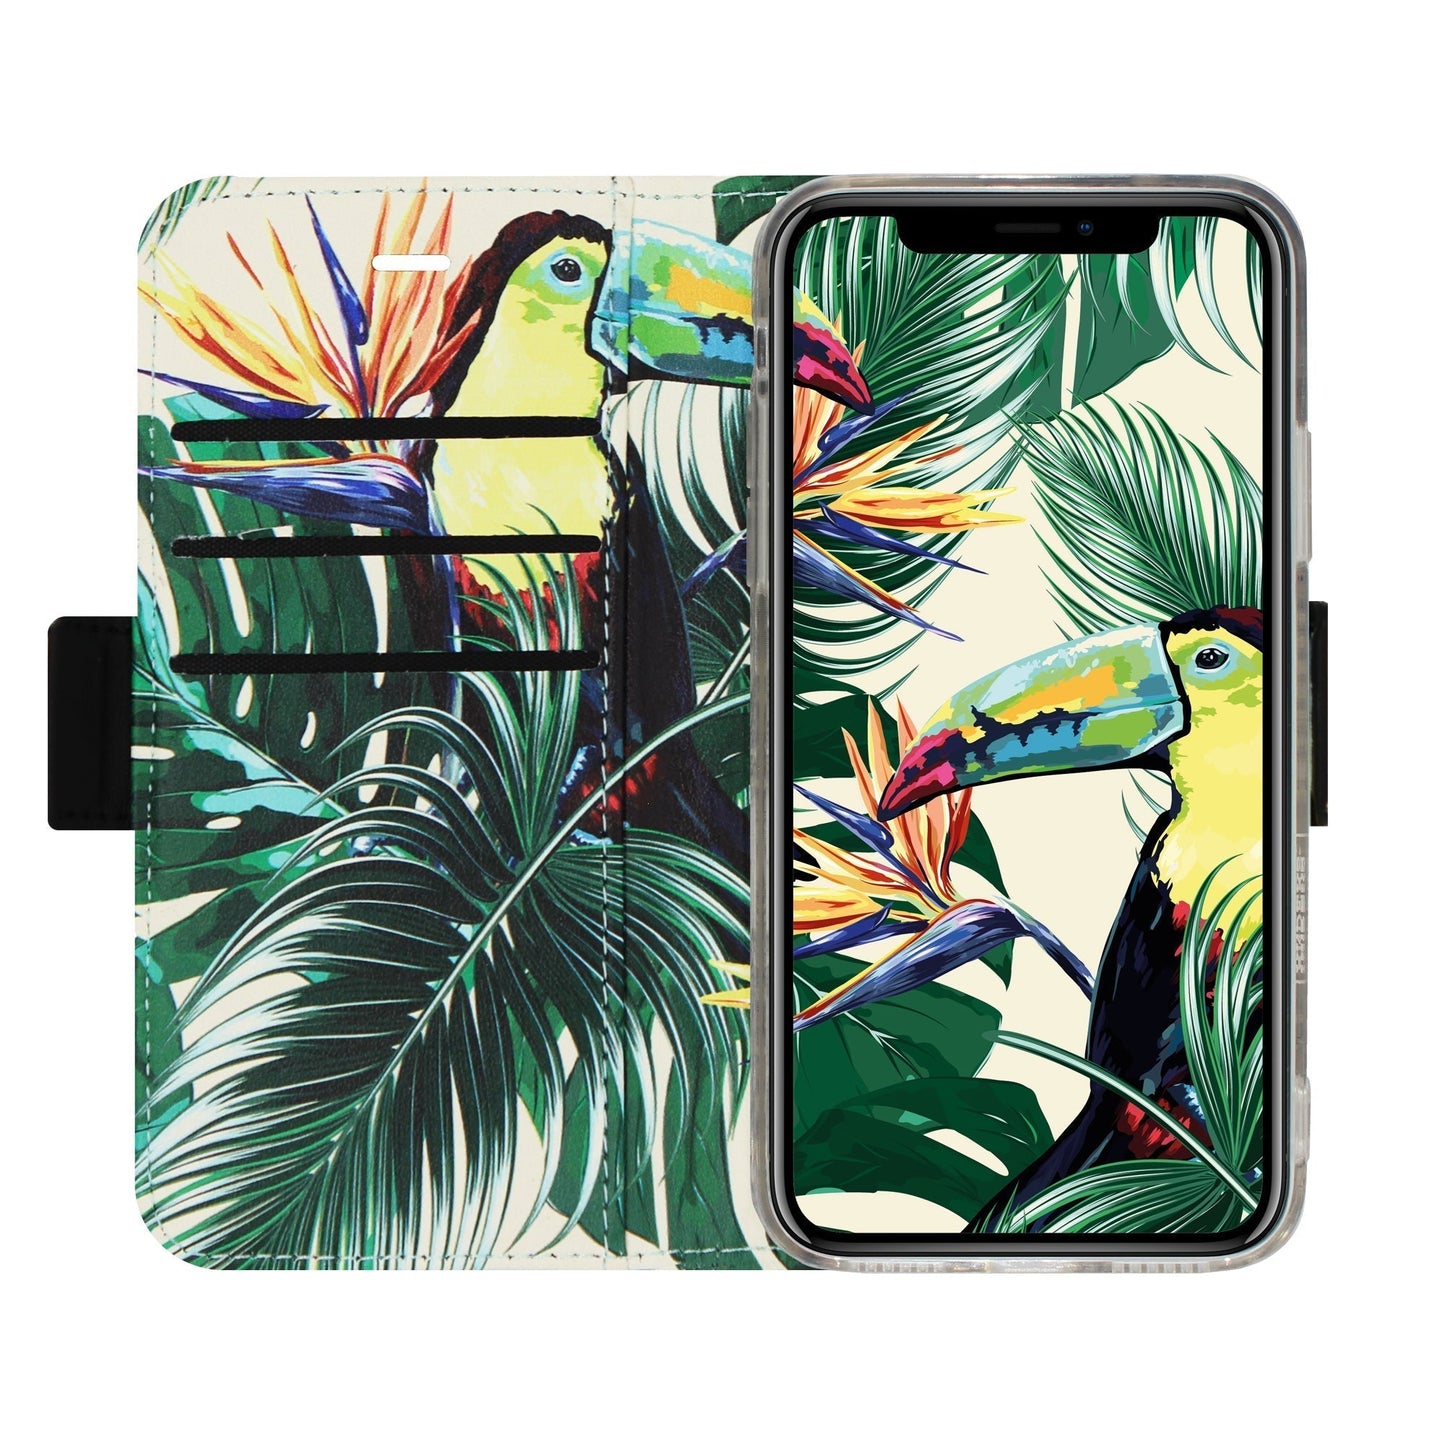 Toucan Victor Case for iPhone X/XS